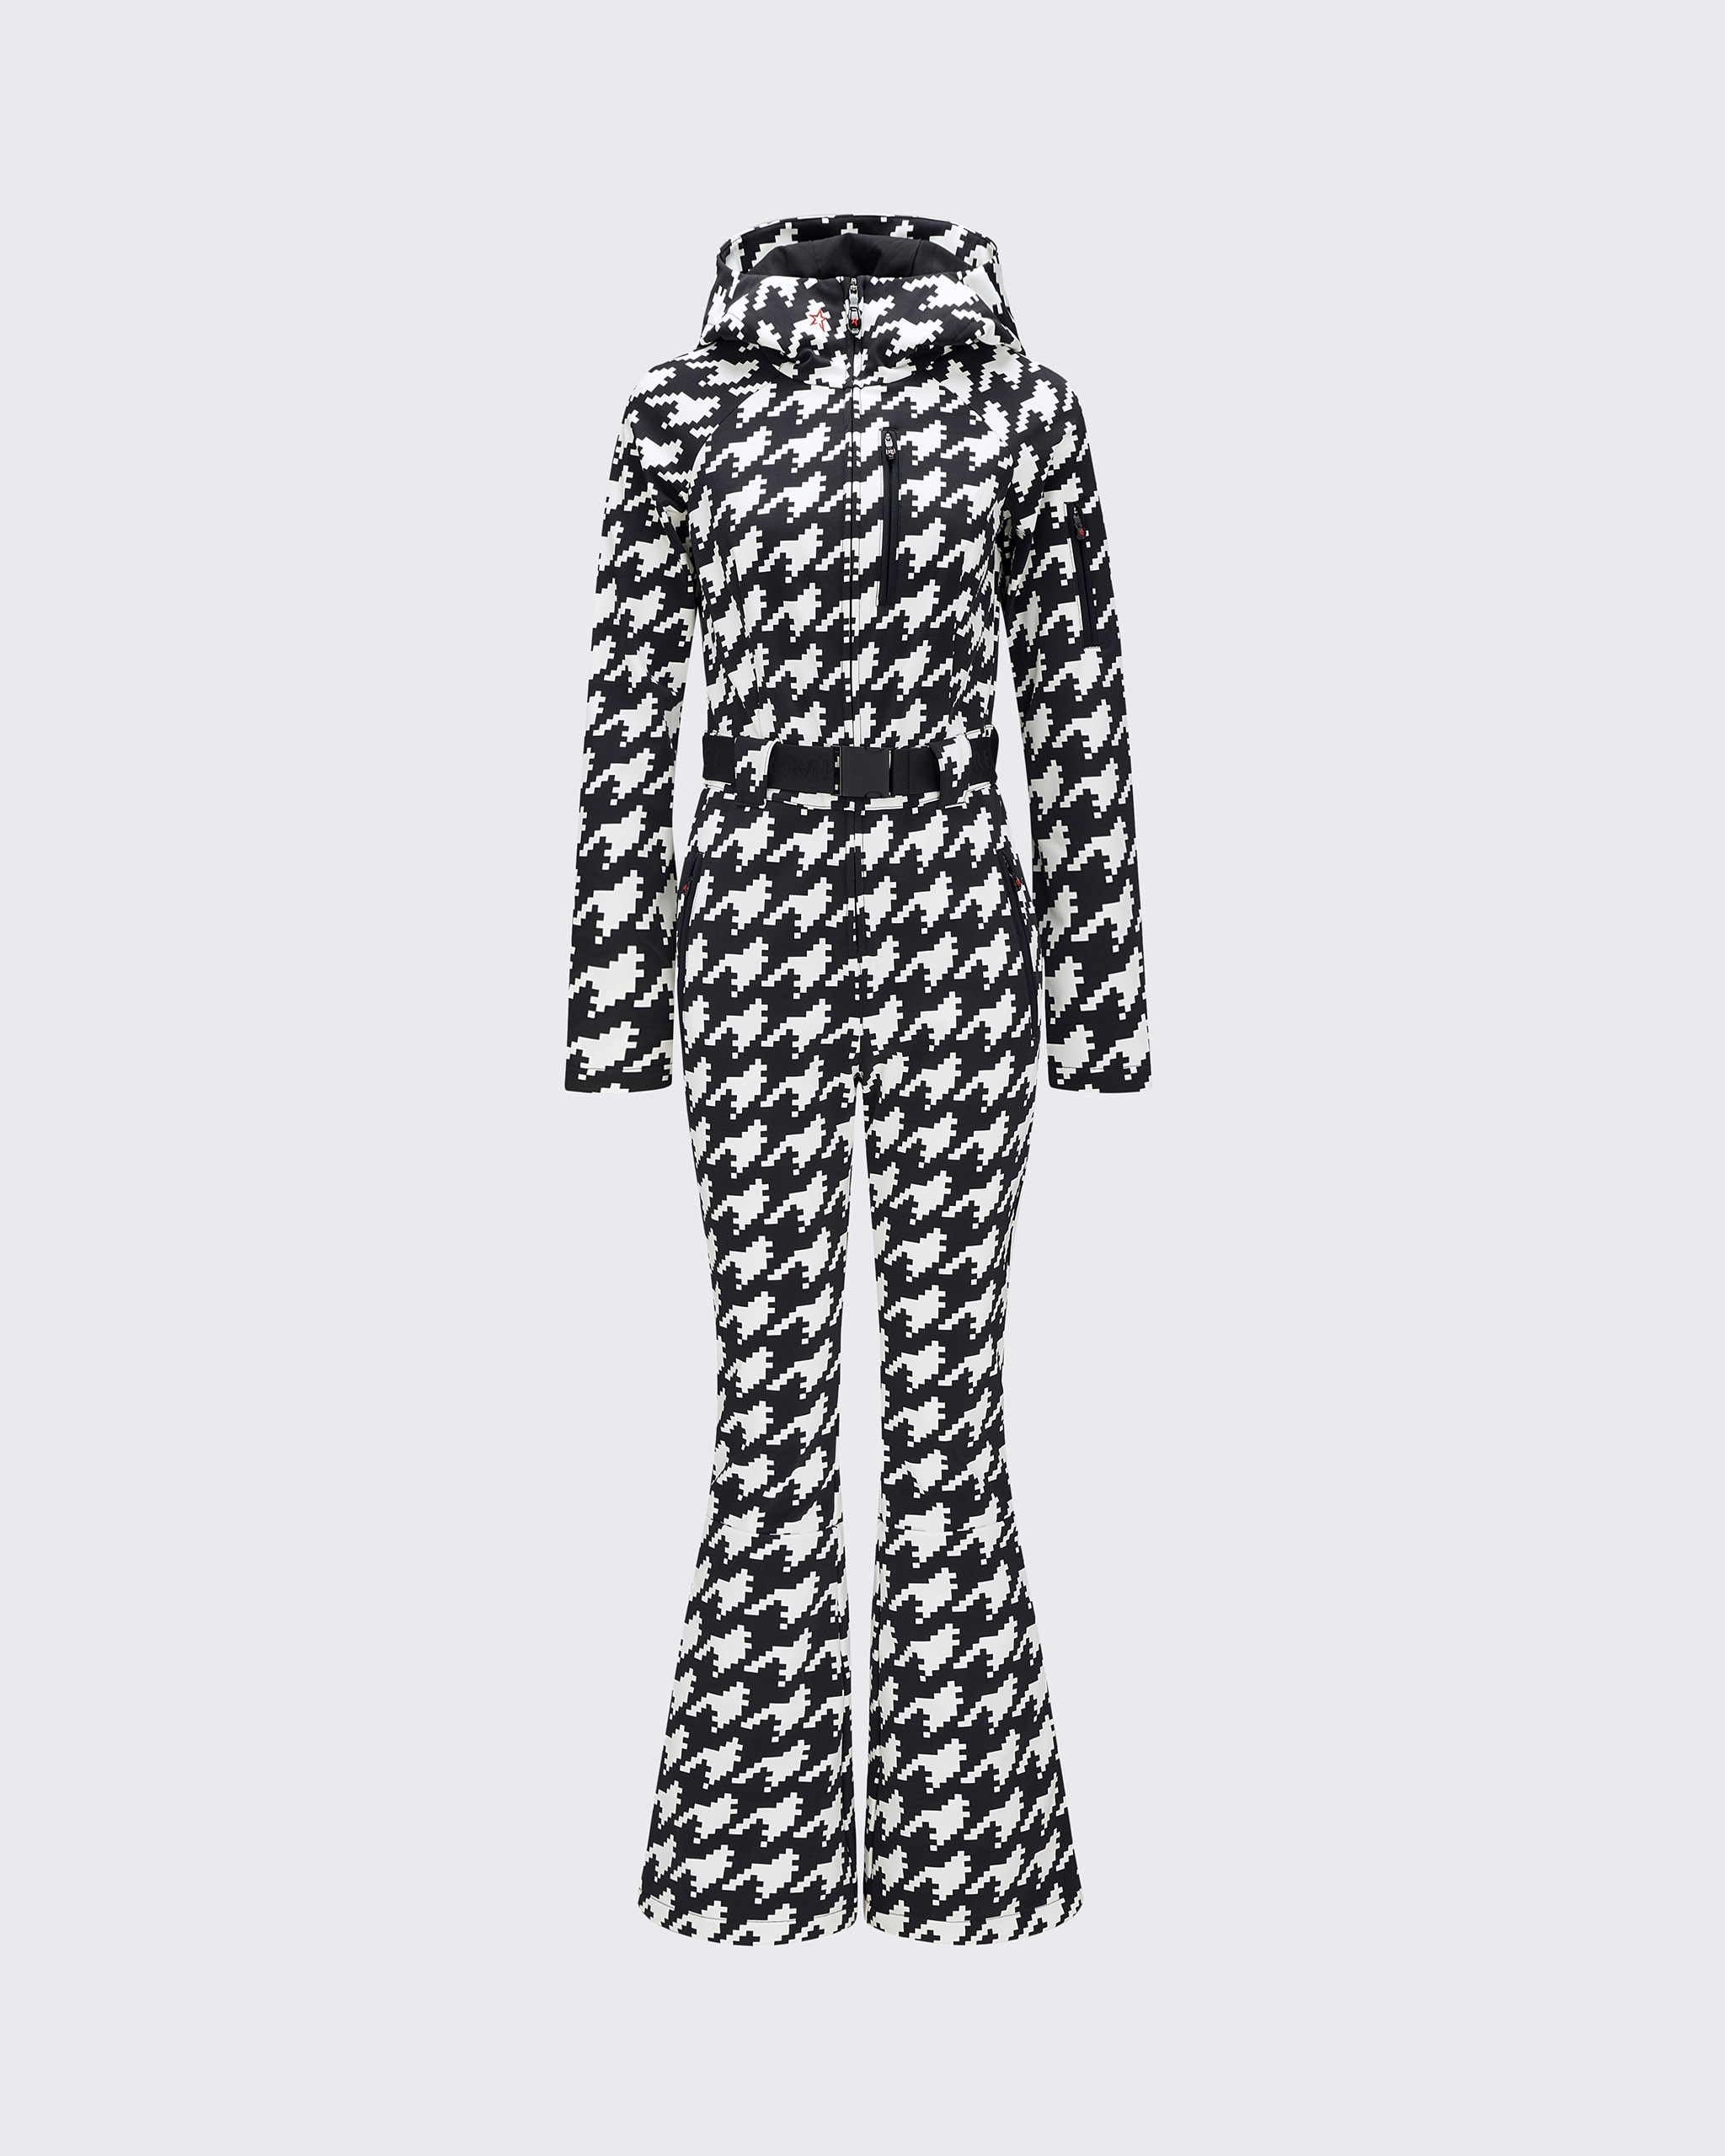 The Houndstooth Edit